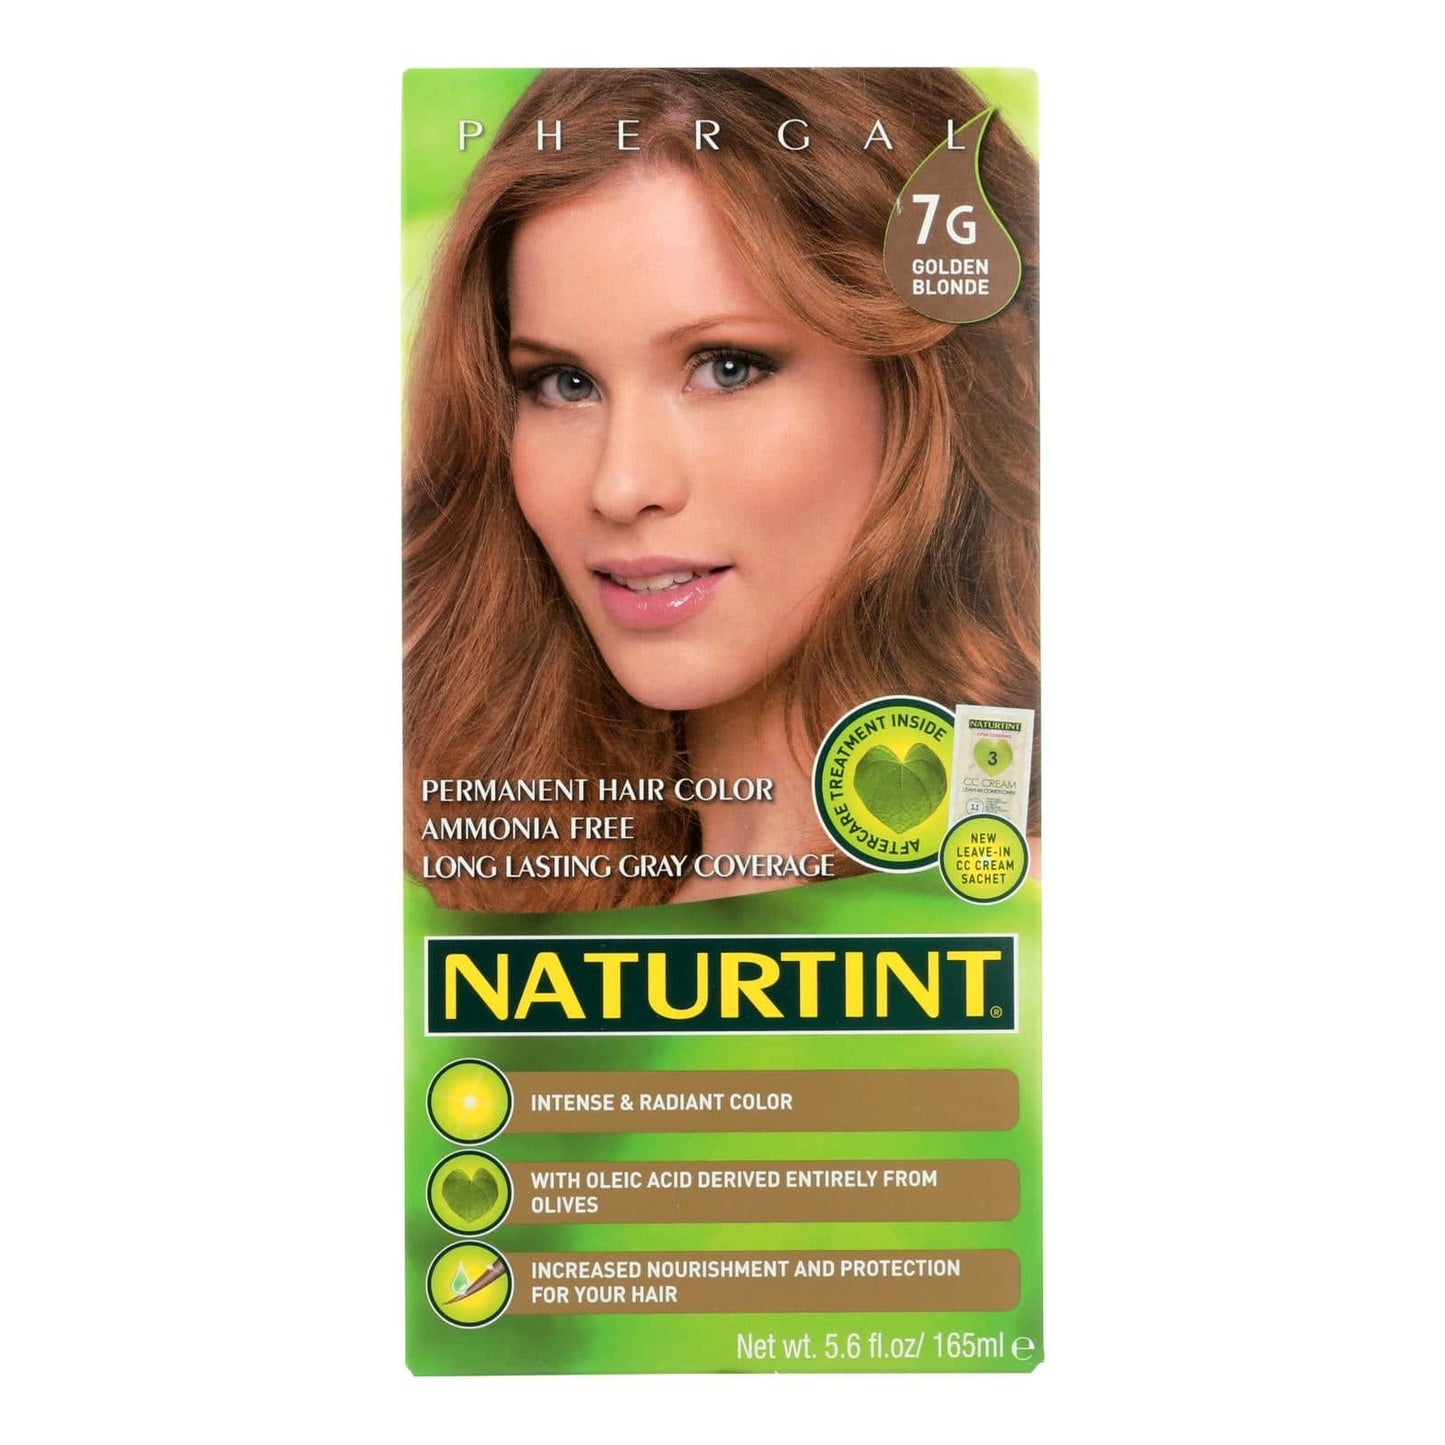 Buy Naturtint Hair Color - Permanent - 7g - Golden Blonde - 5.28 Oz  at OnlyNaturals.us